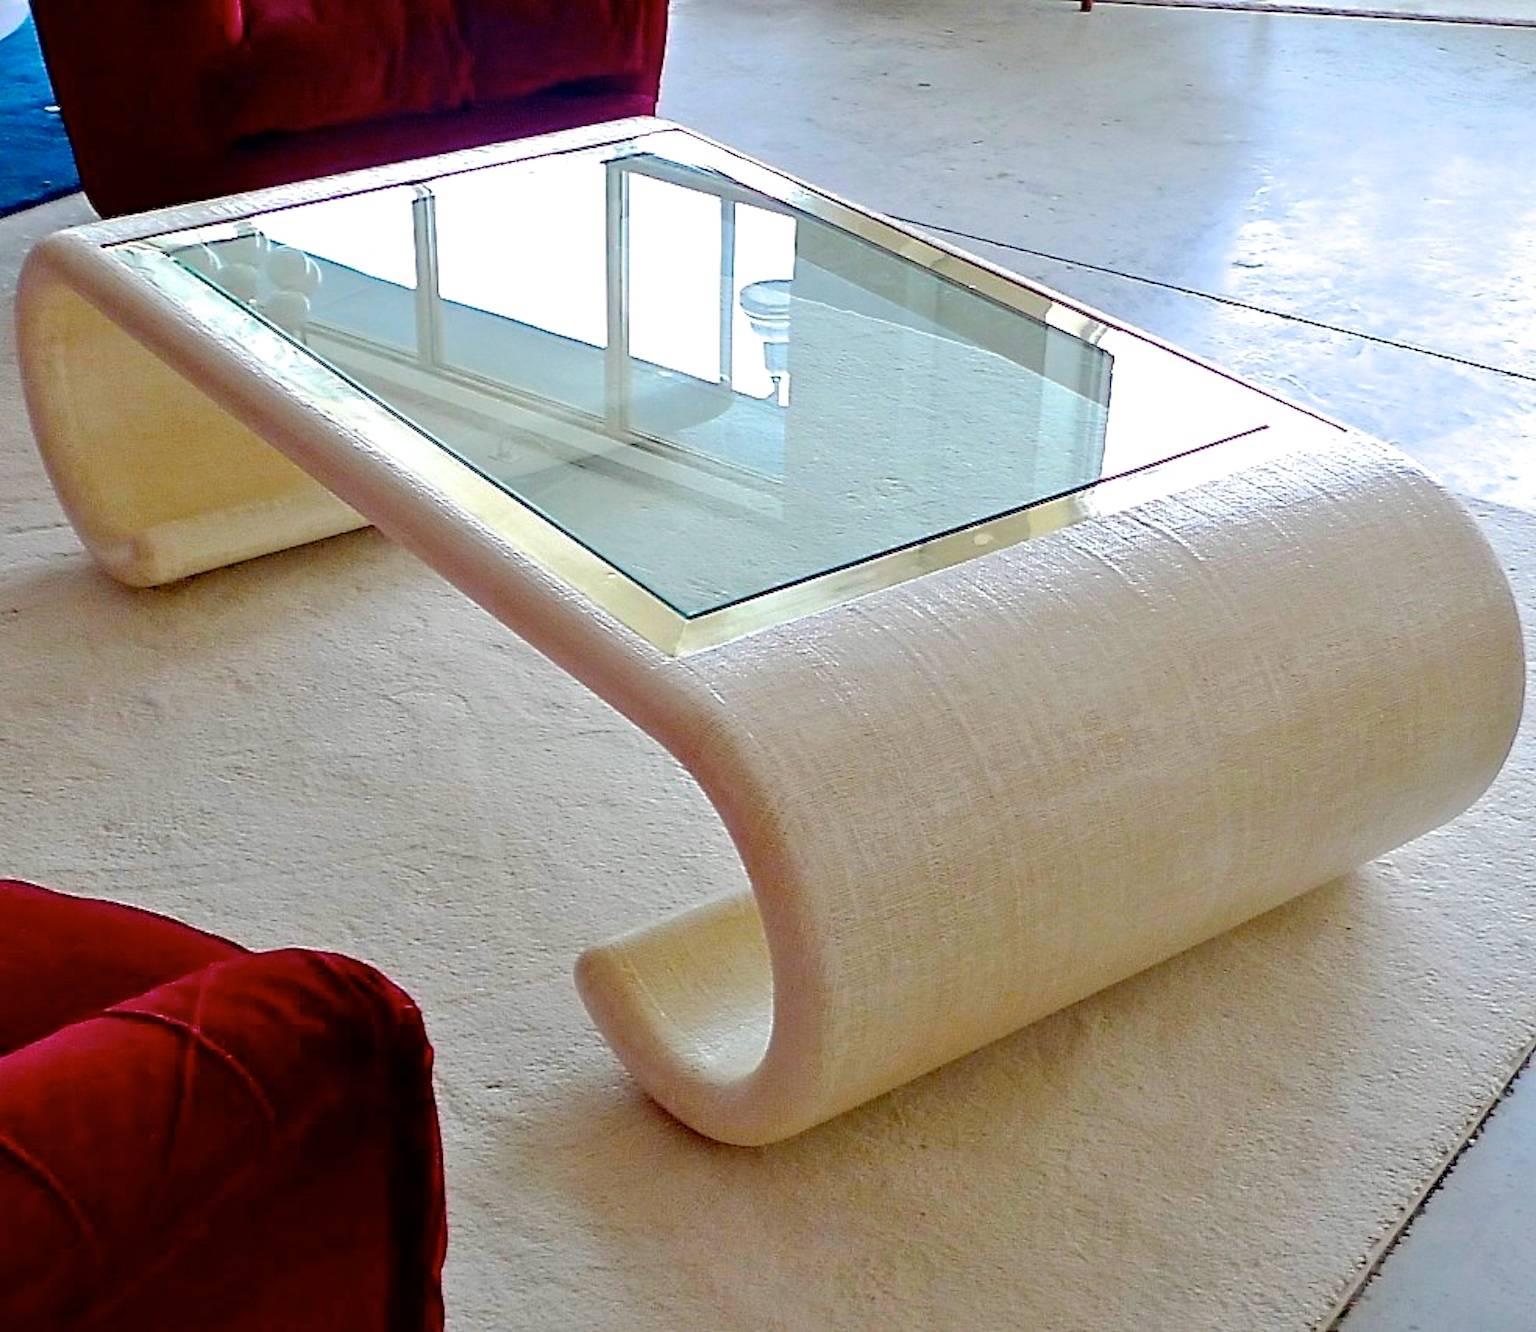 Large-scale vintage 1970s coffee table in Ming style scrolled form with inset rectangular glass top framed by squared edge polished brass, this table was designed by Ernest C. Masi and produced in Colombia by the French & English Furniture Company.